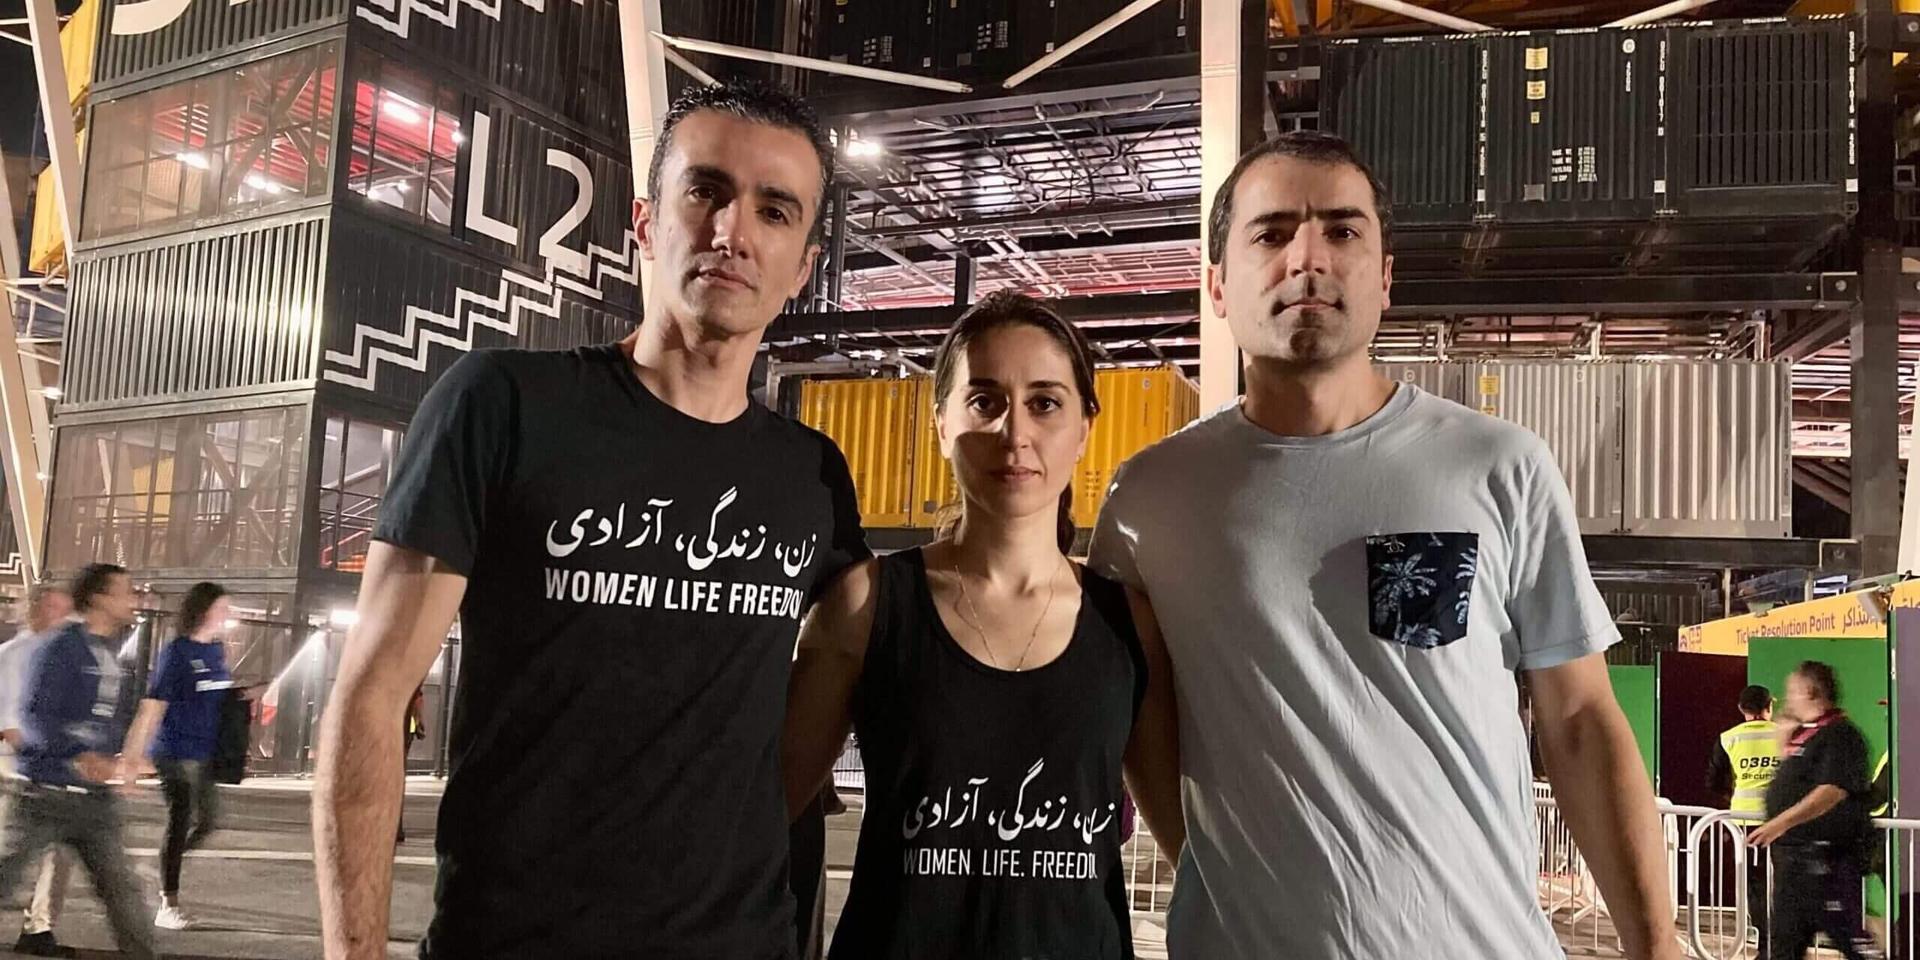 'I don’t feel safe': Detained at the World Cup for wearing a 'Women Life Freedom' T-shirt